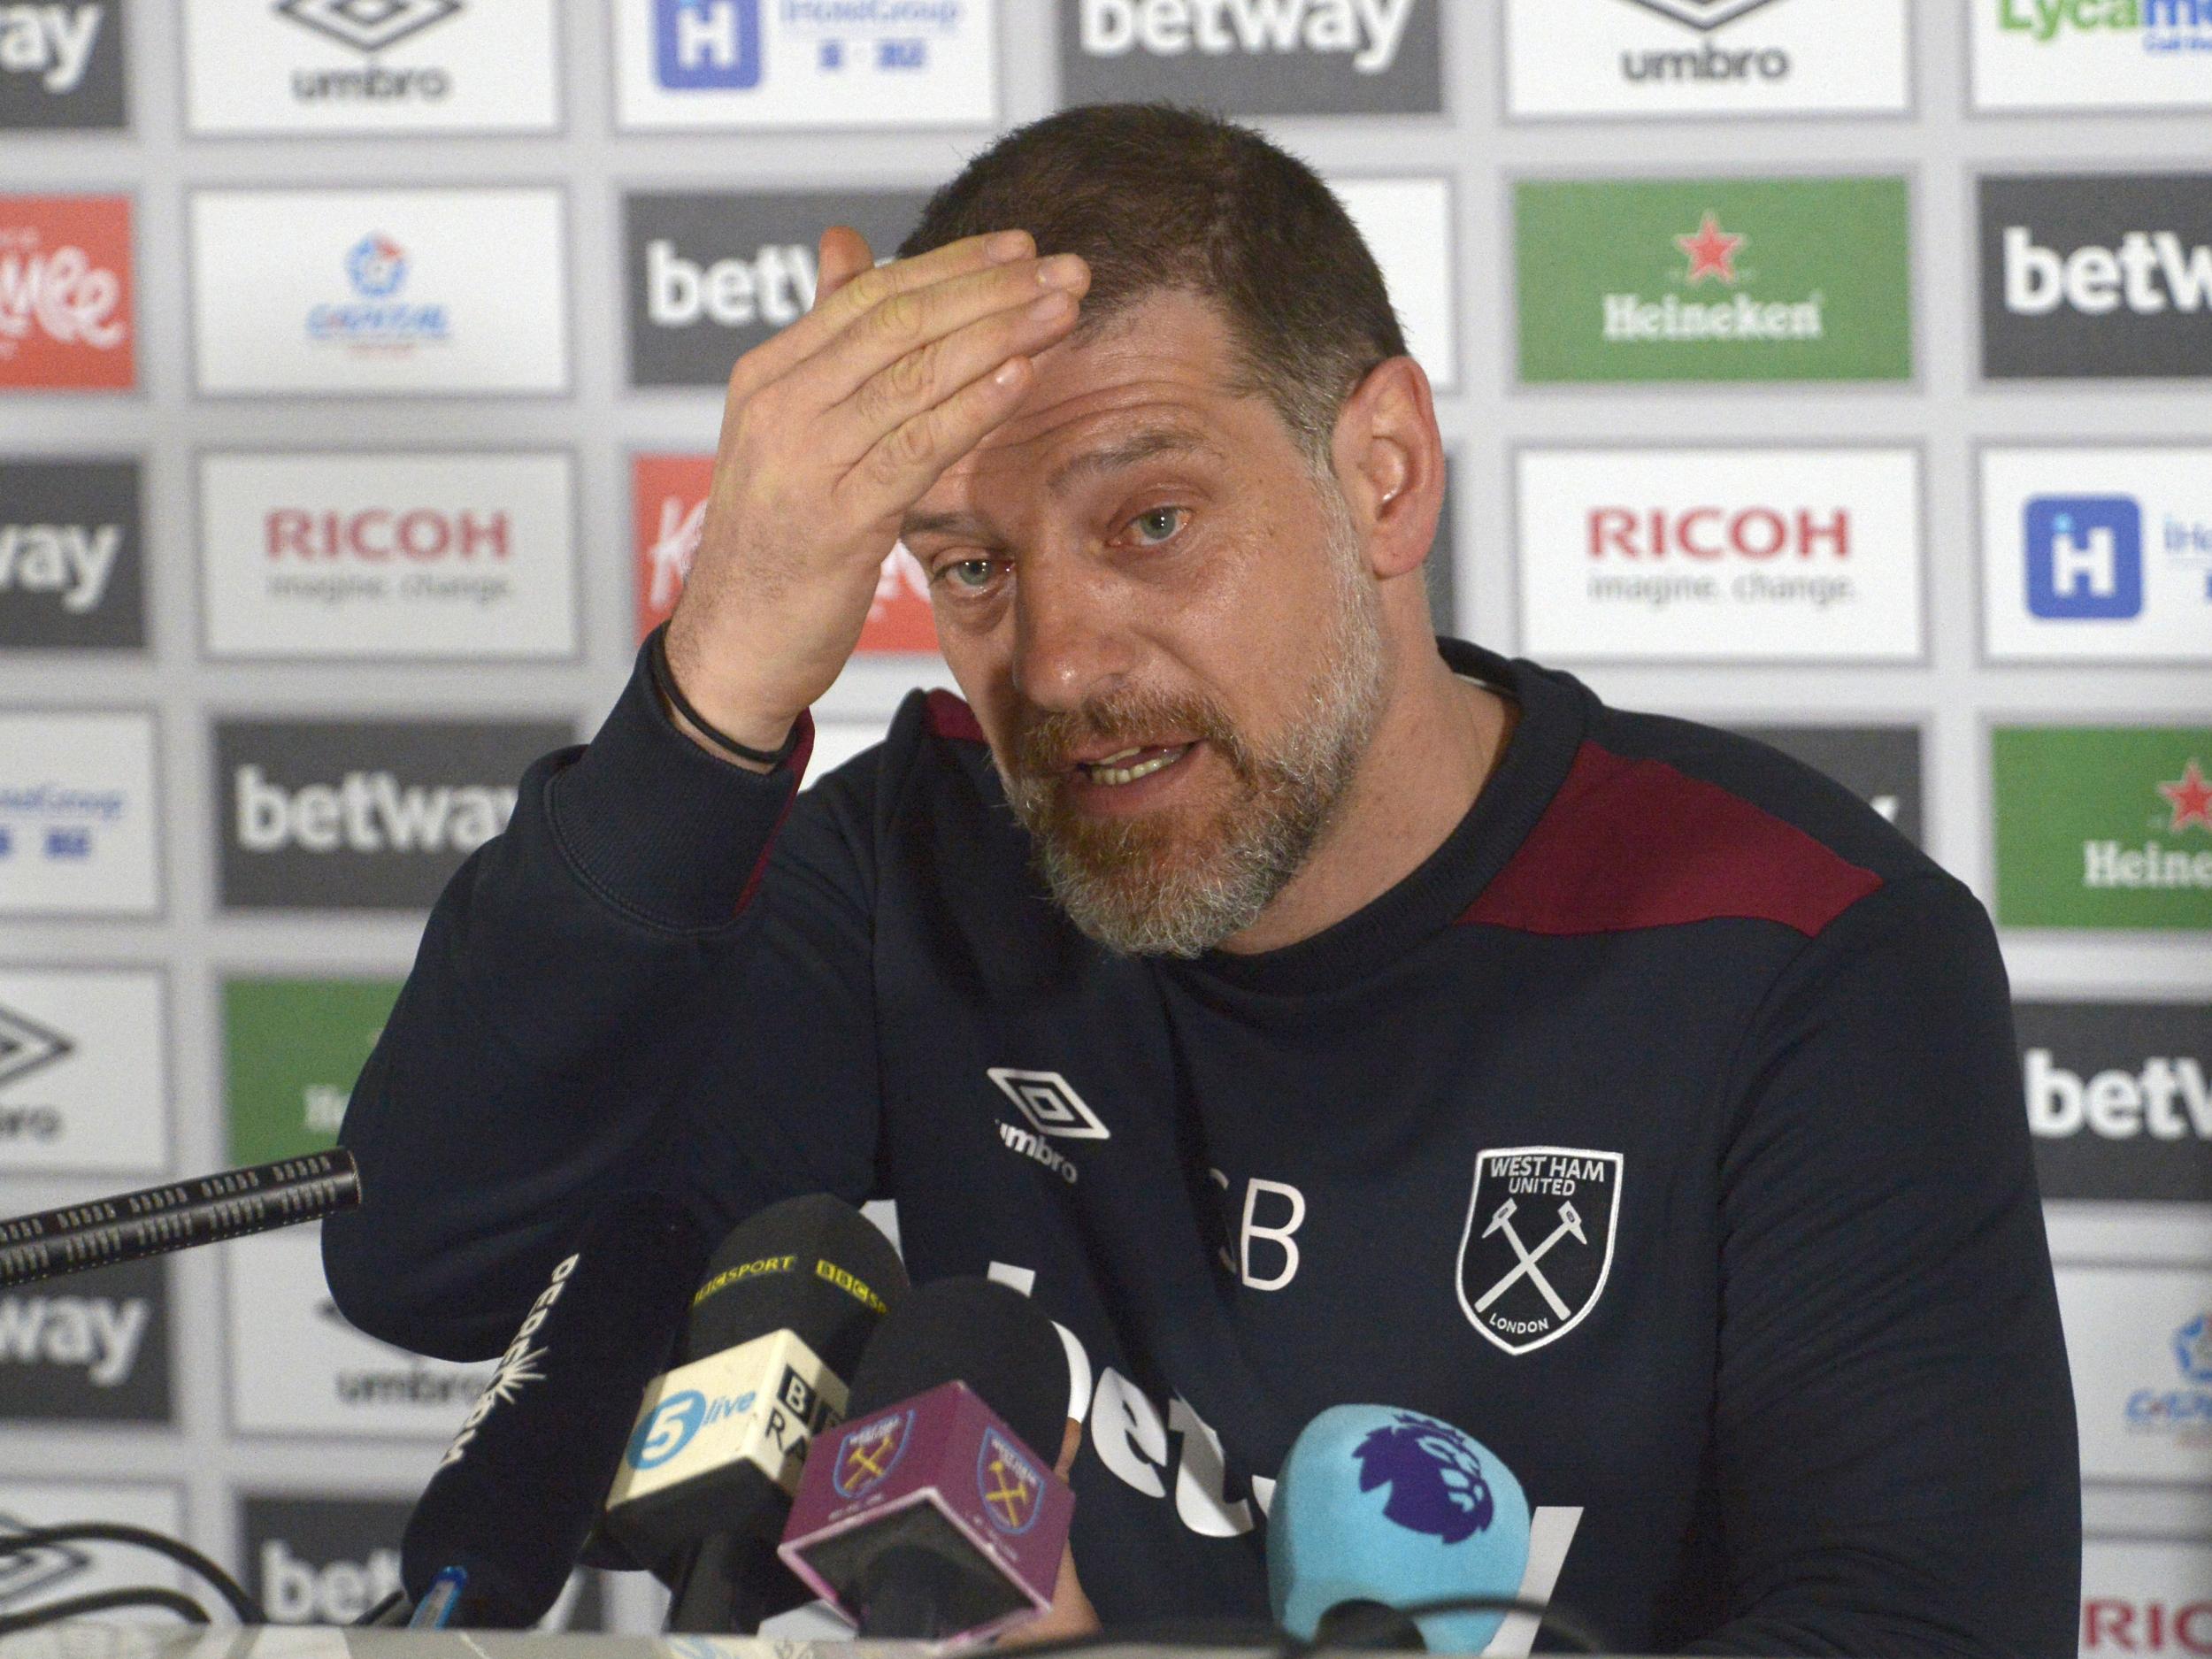 Bilic addressed the uncertainty over Carroll's future